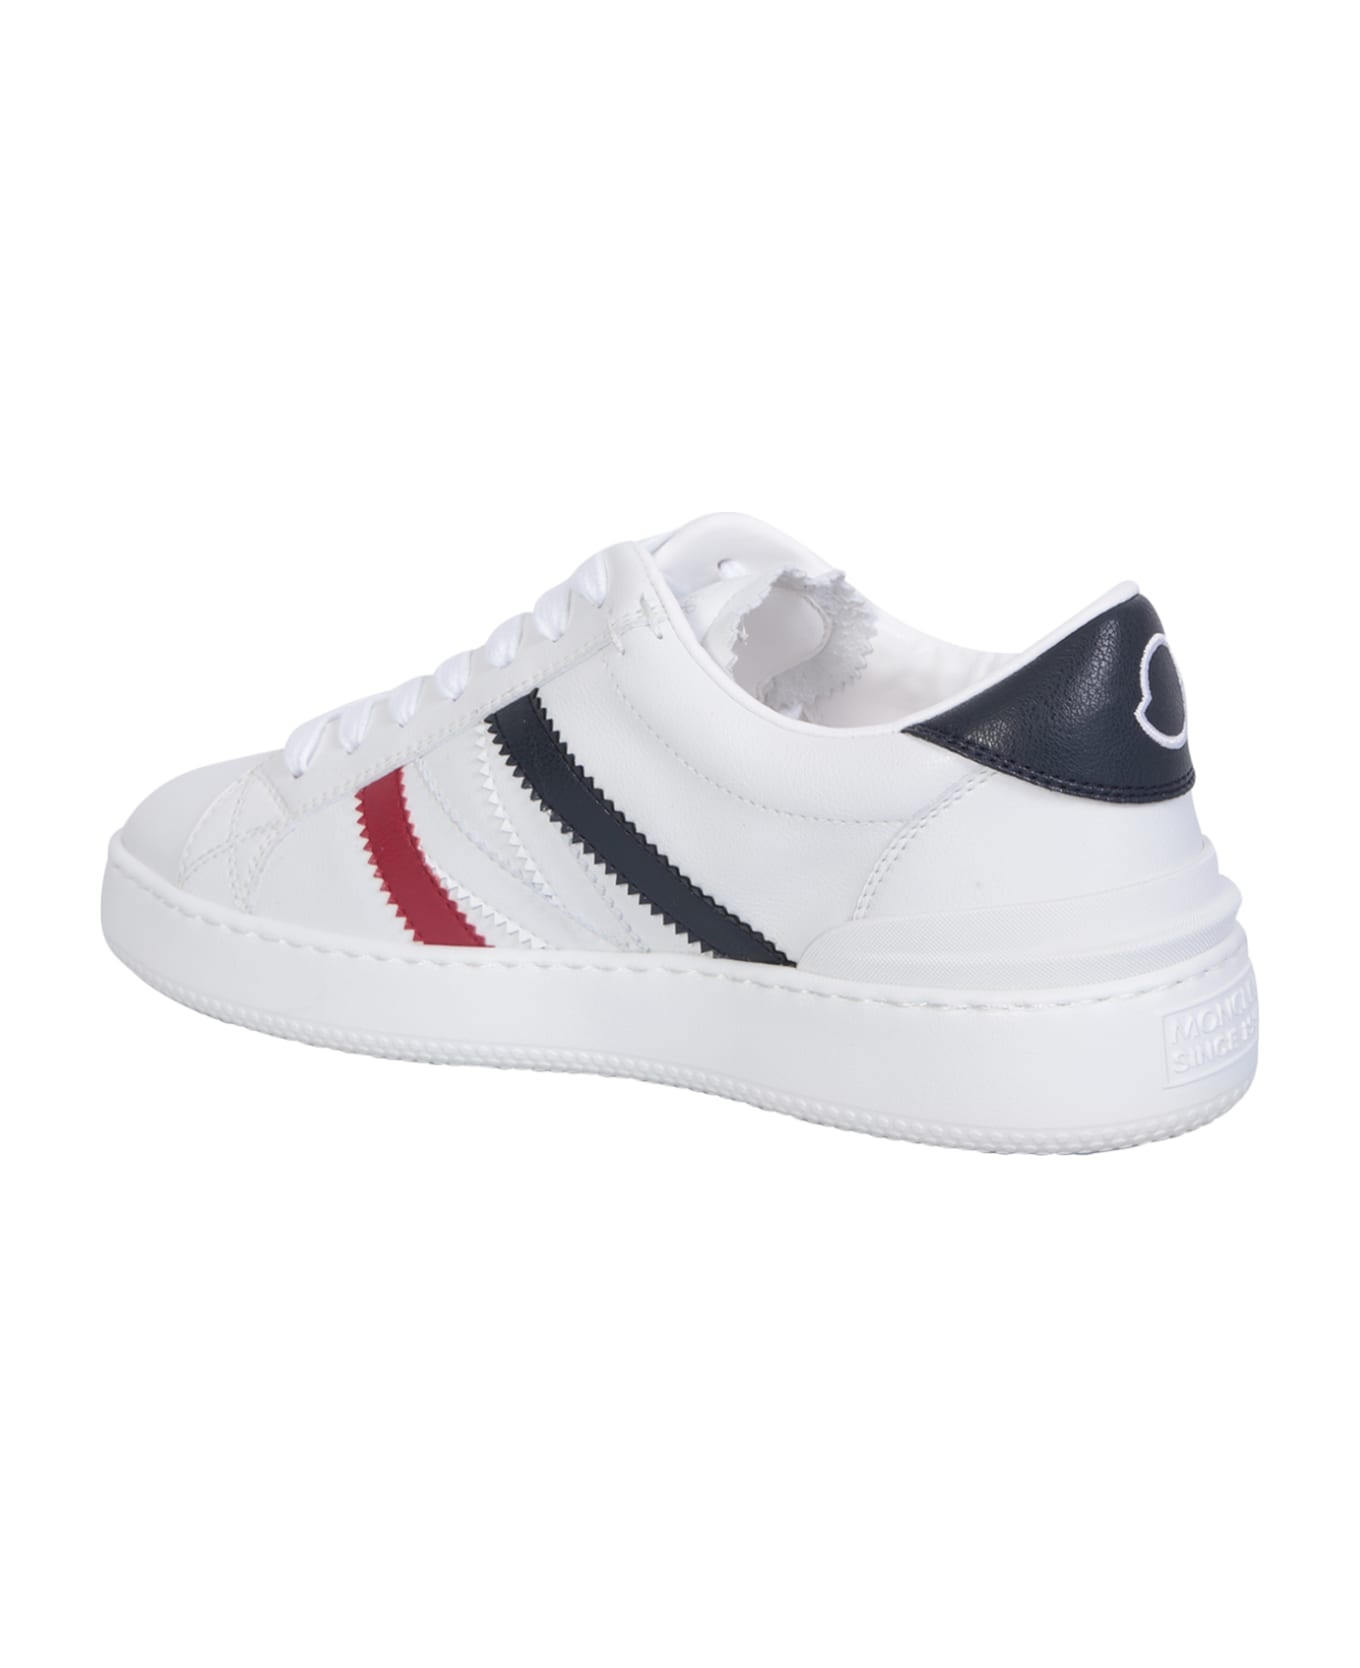 Monaco M Sneakers In White, Blue And Red - 3